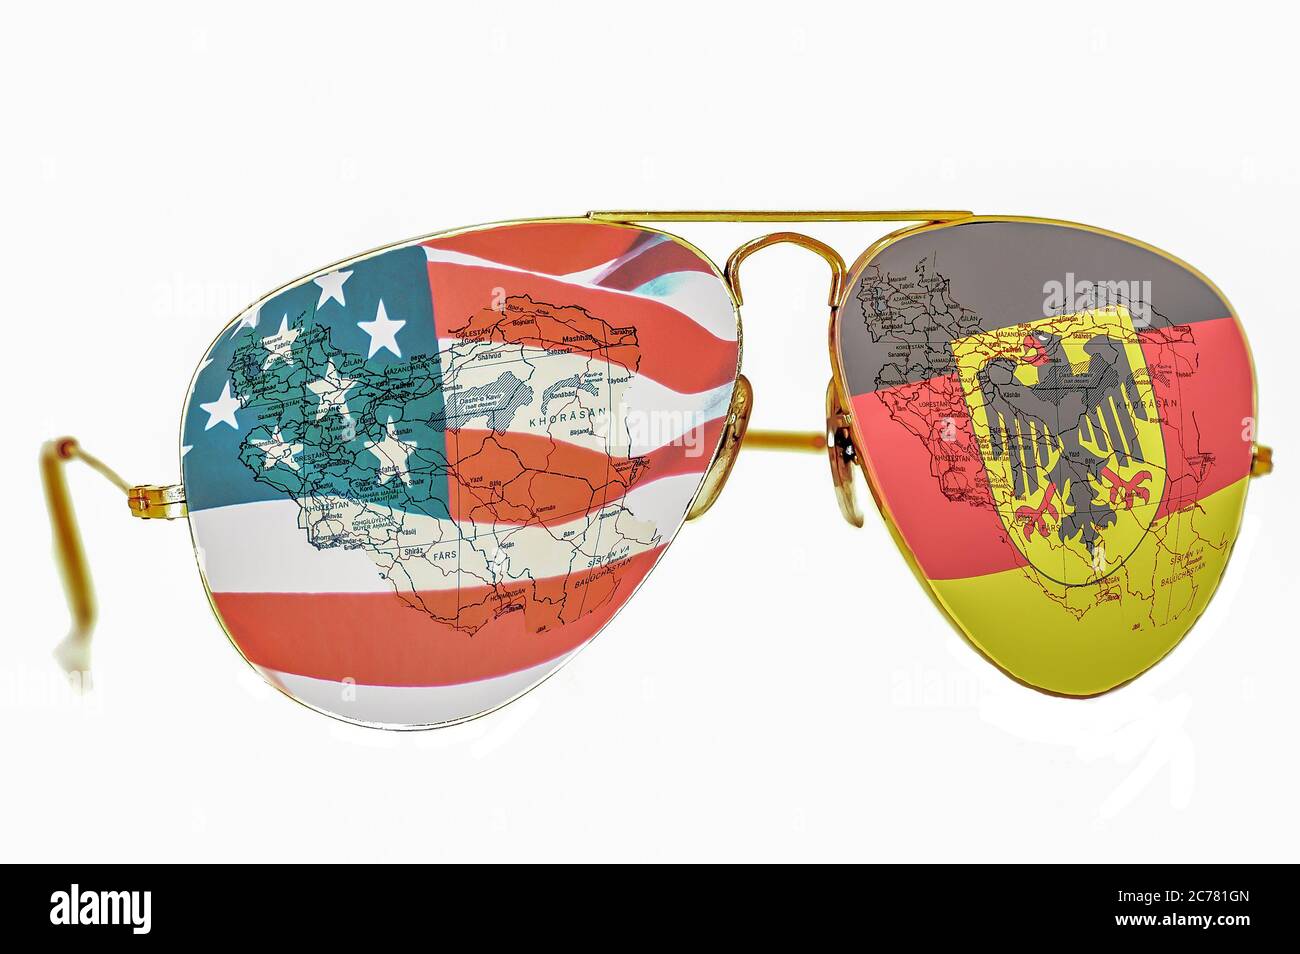 BELGRADE, SERBIA  December 17, 2017: Sunglasses with an American and Germany flag and a map of Iran on white background Stock Photo